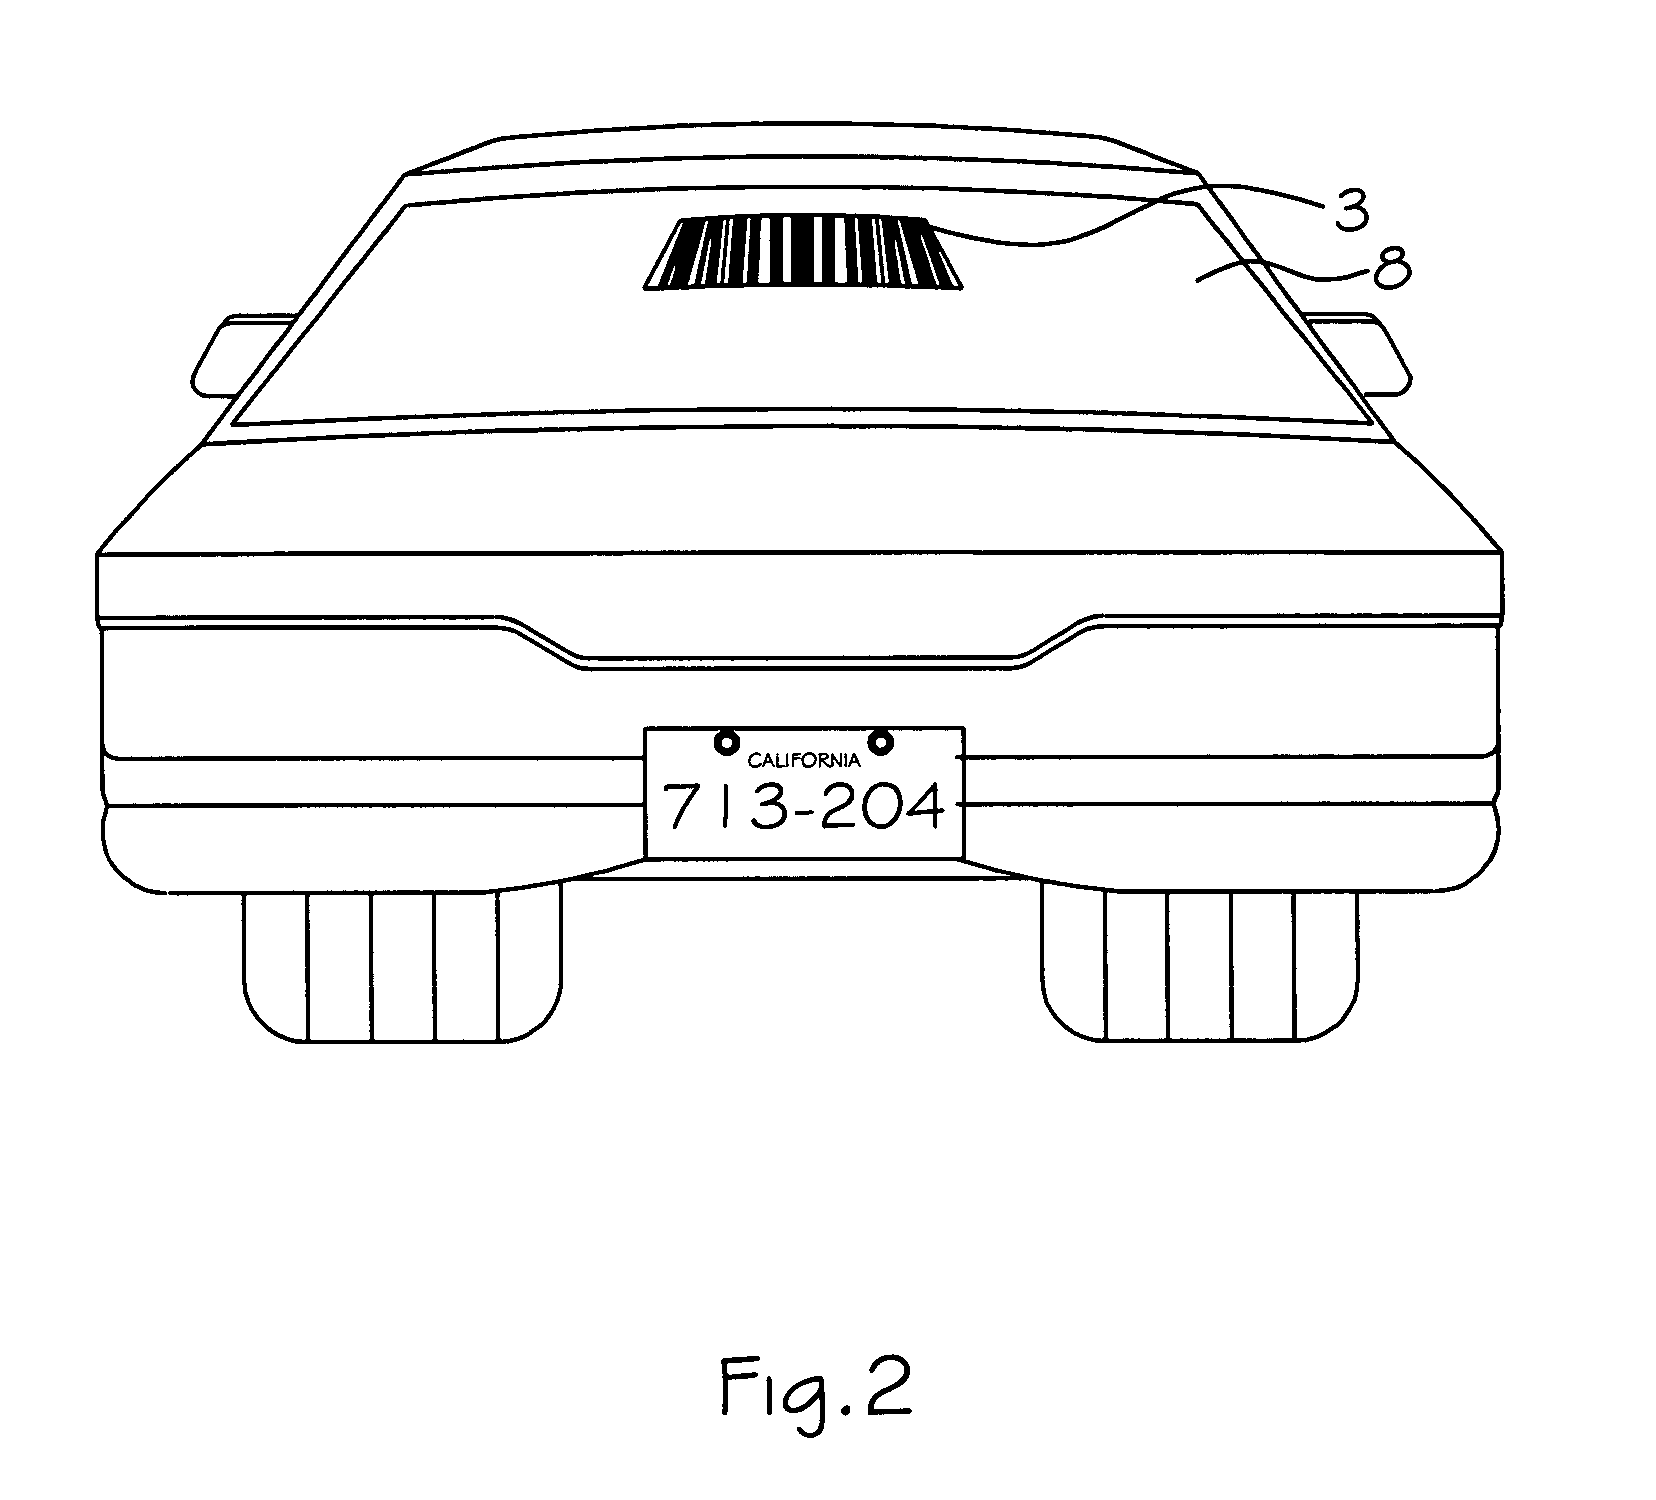 Method of stopping a stolen car without a high-speed chase, utilizing a bar code